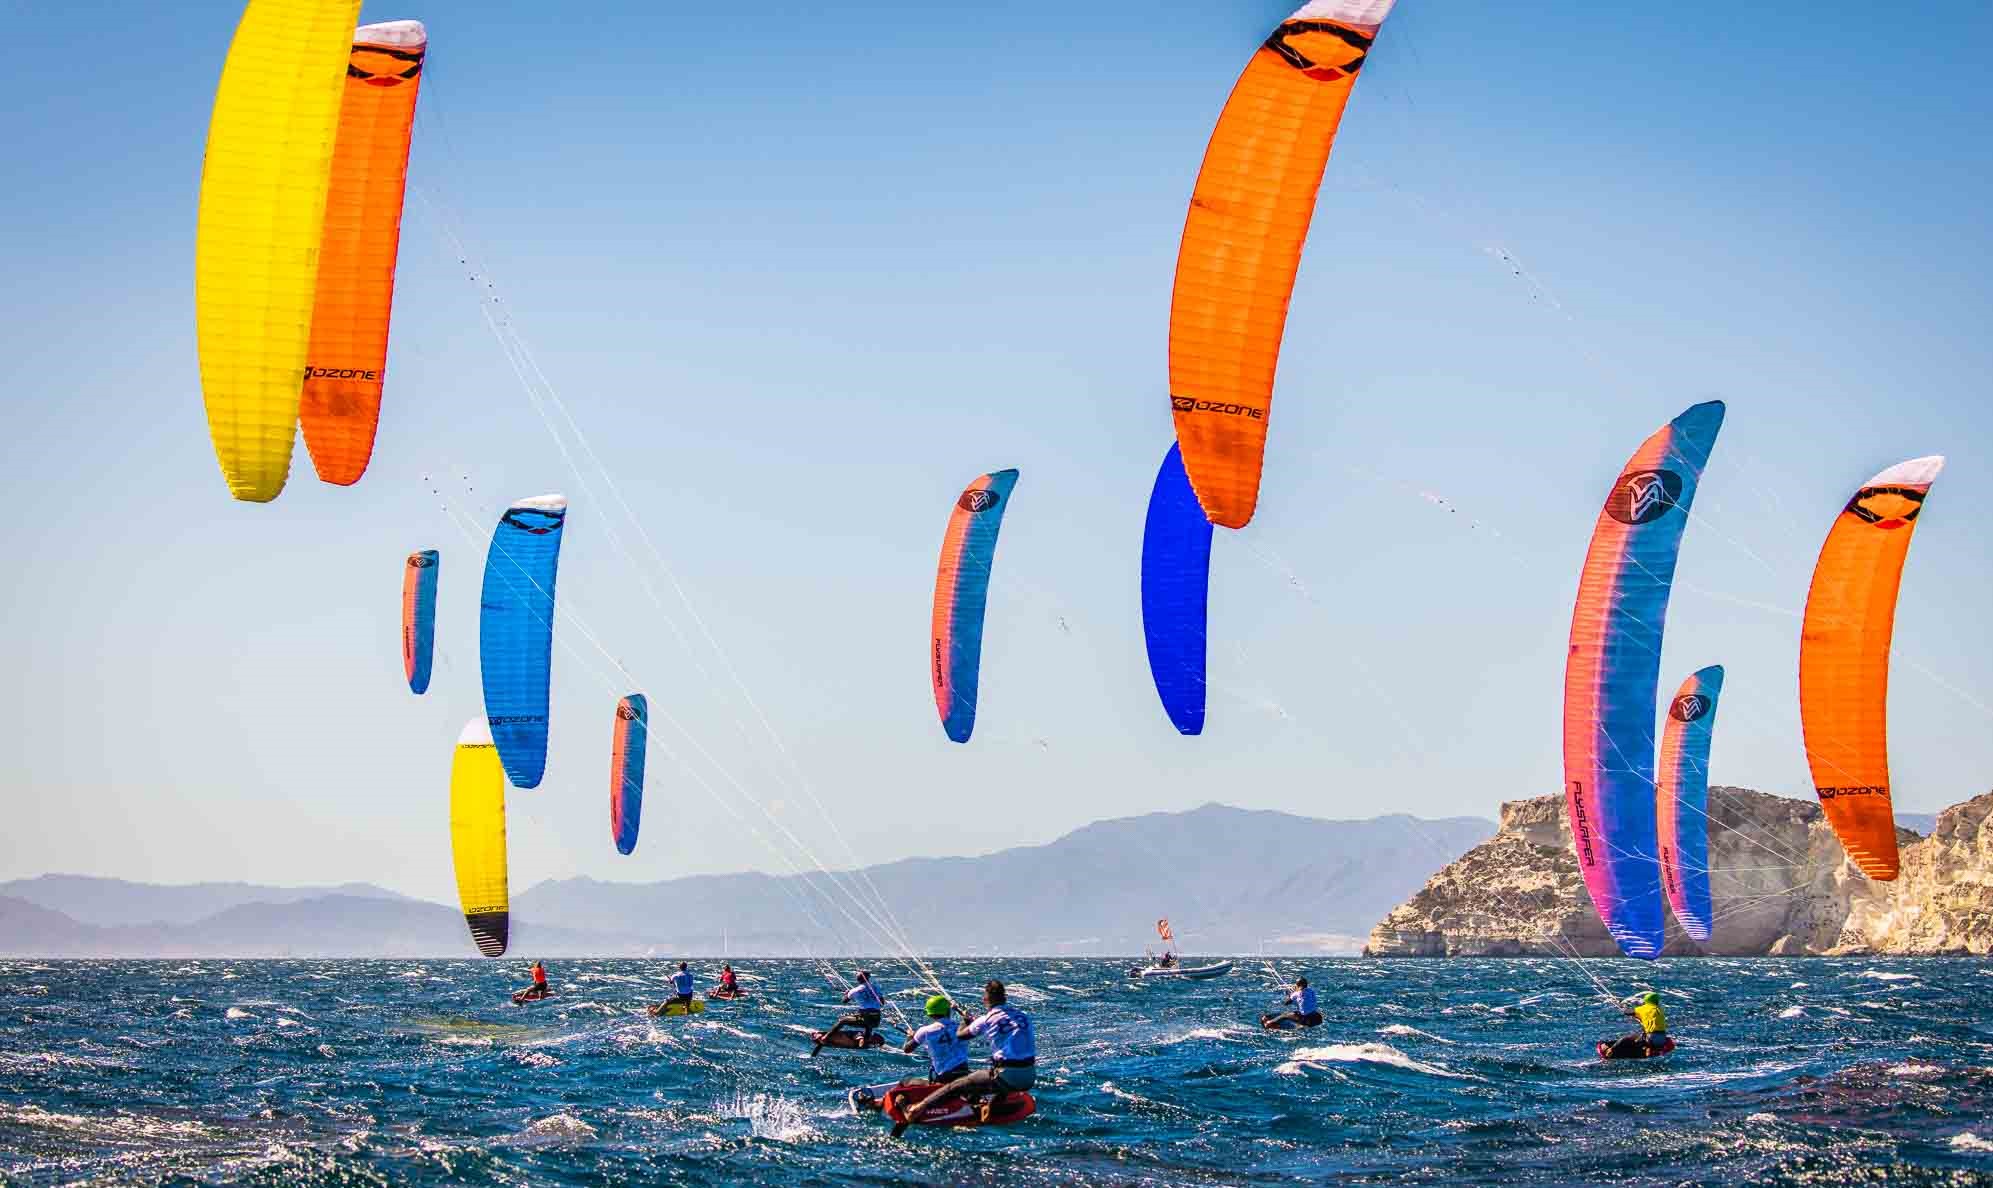 Sardinia Grand Slam: in Cagliari are to be awarded the world titles of KiteFoil